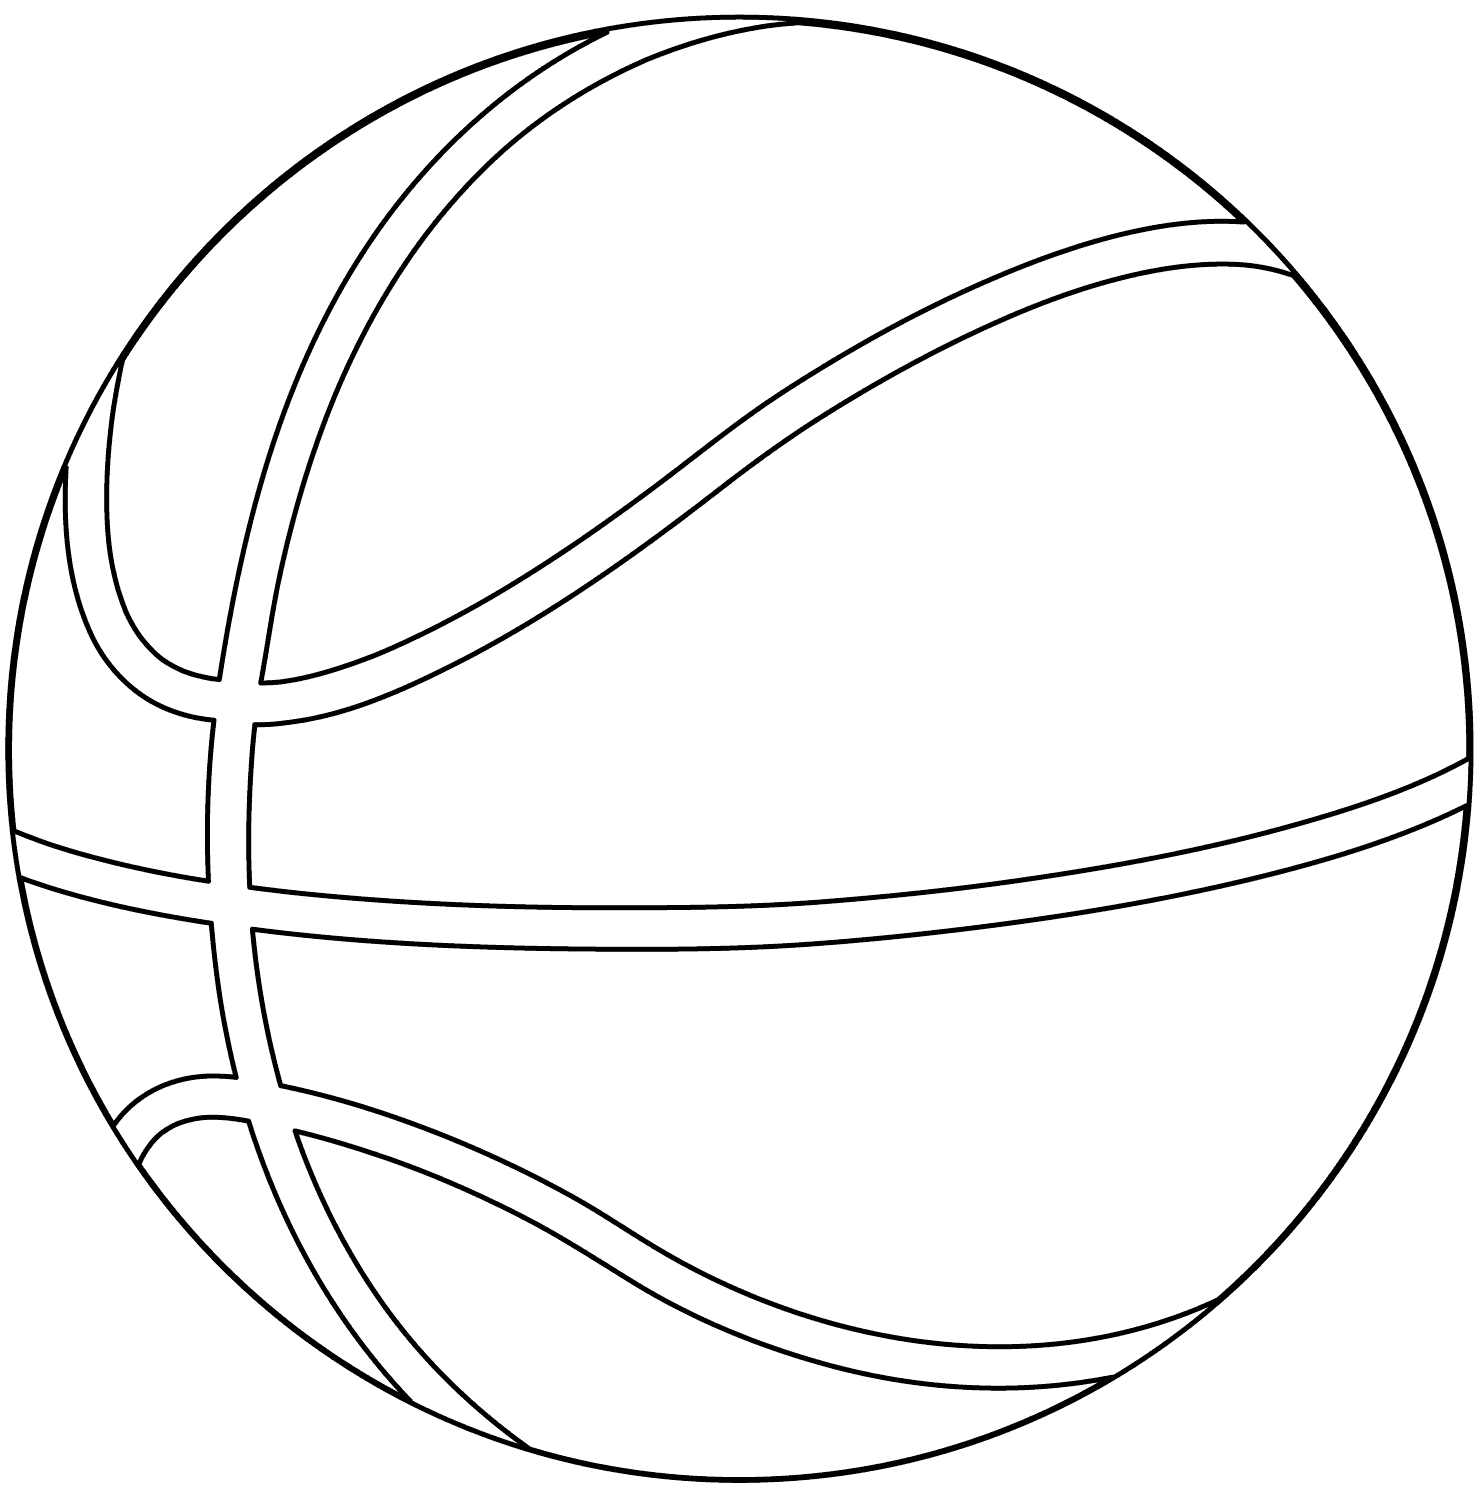 Basketball Ball Coloring Page - Free Printable Coloring Pages for Kids